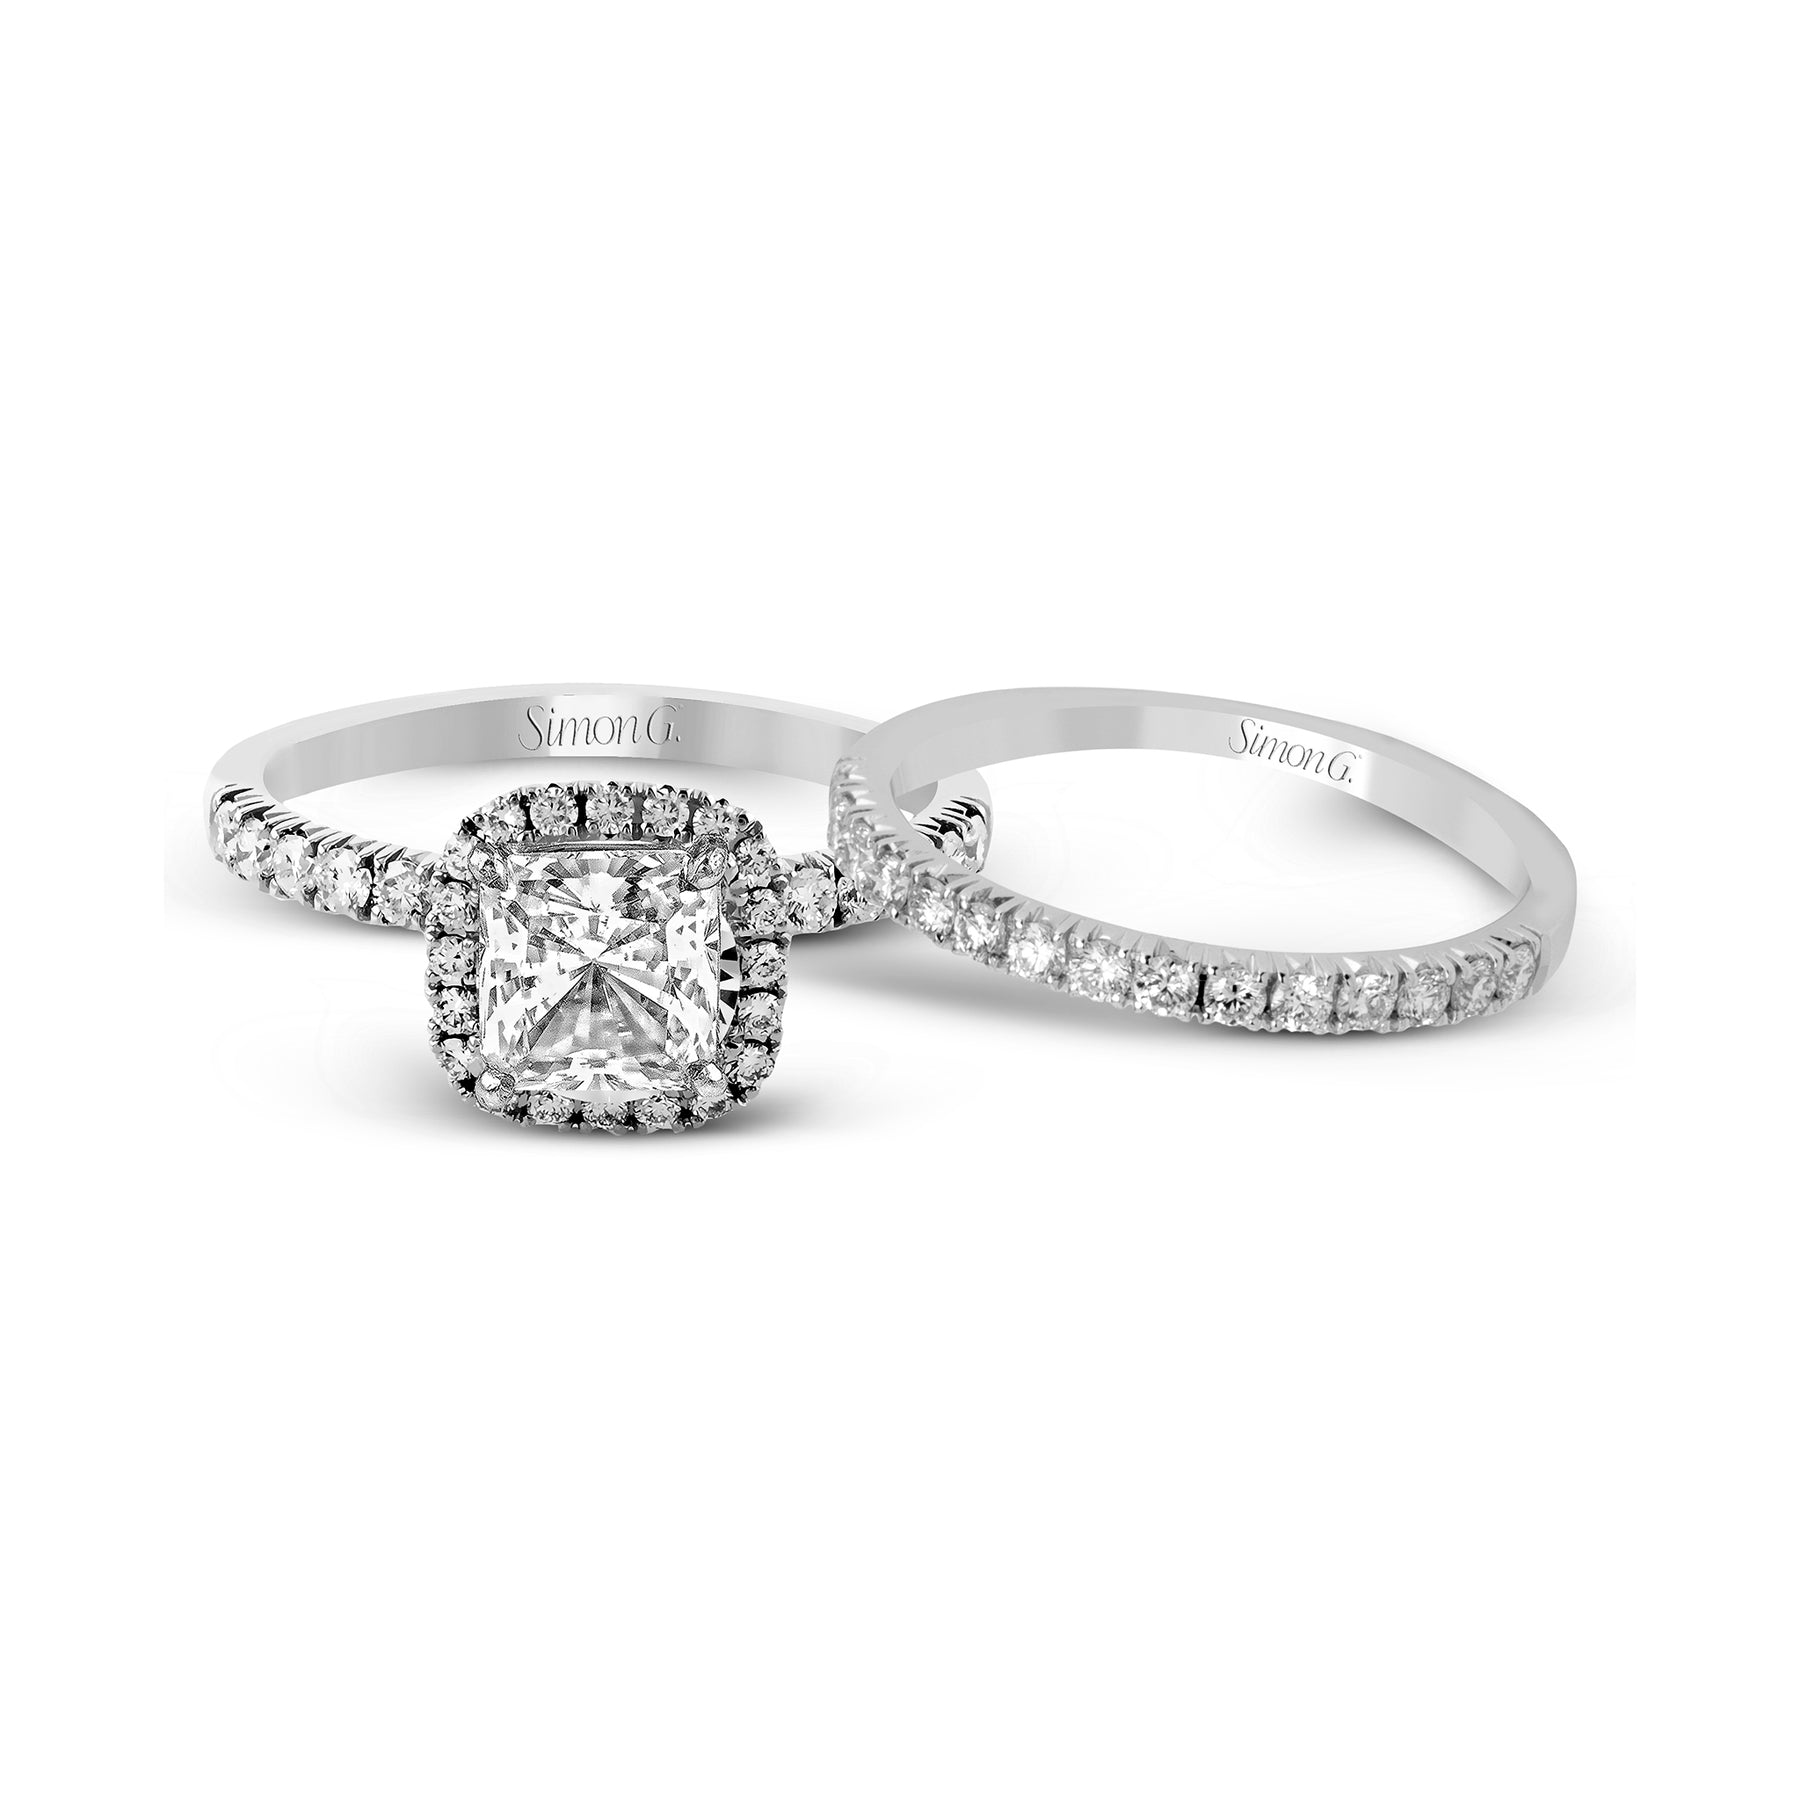 Princess-cut Halo Engagement Ring & Matching Wedding Band in 18k Gold with Diamonds MR2132-PC